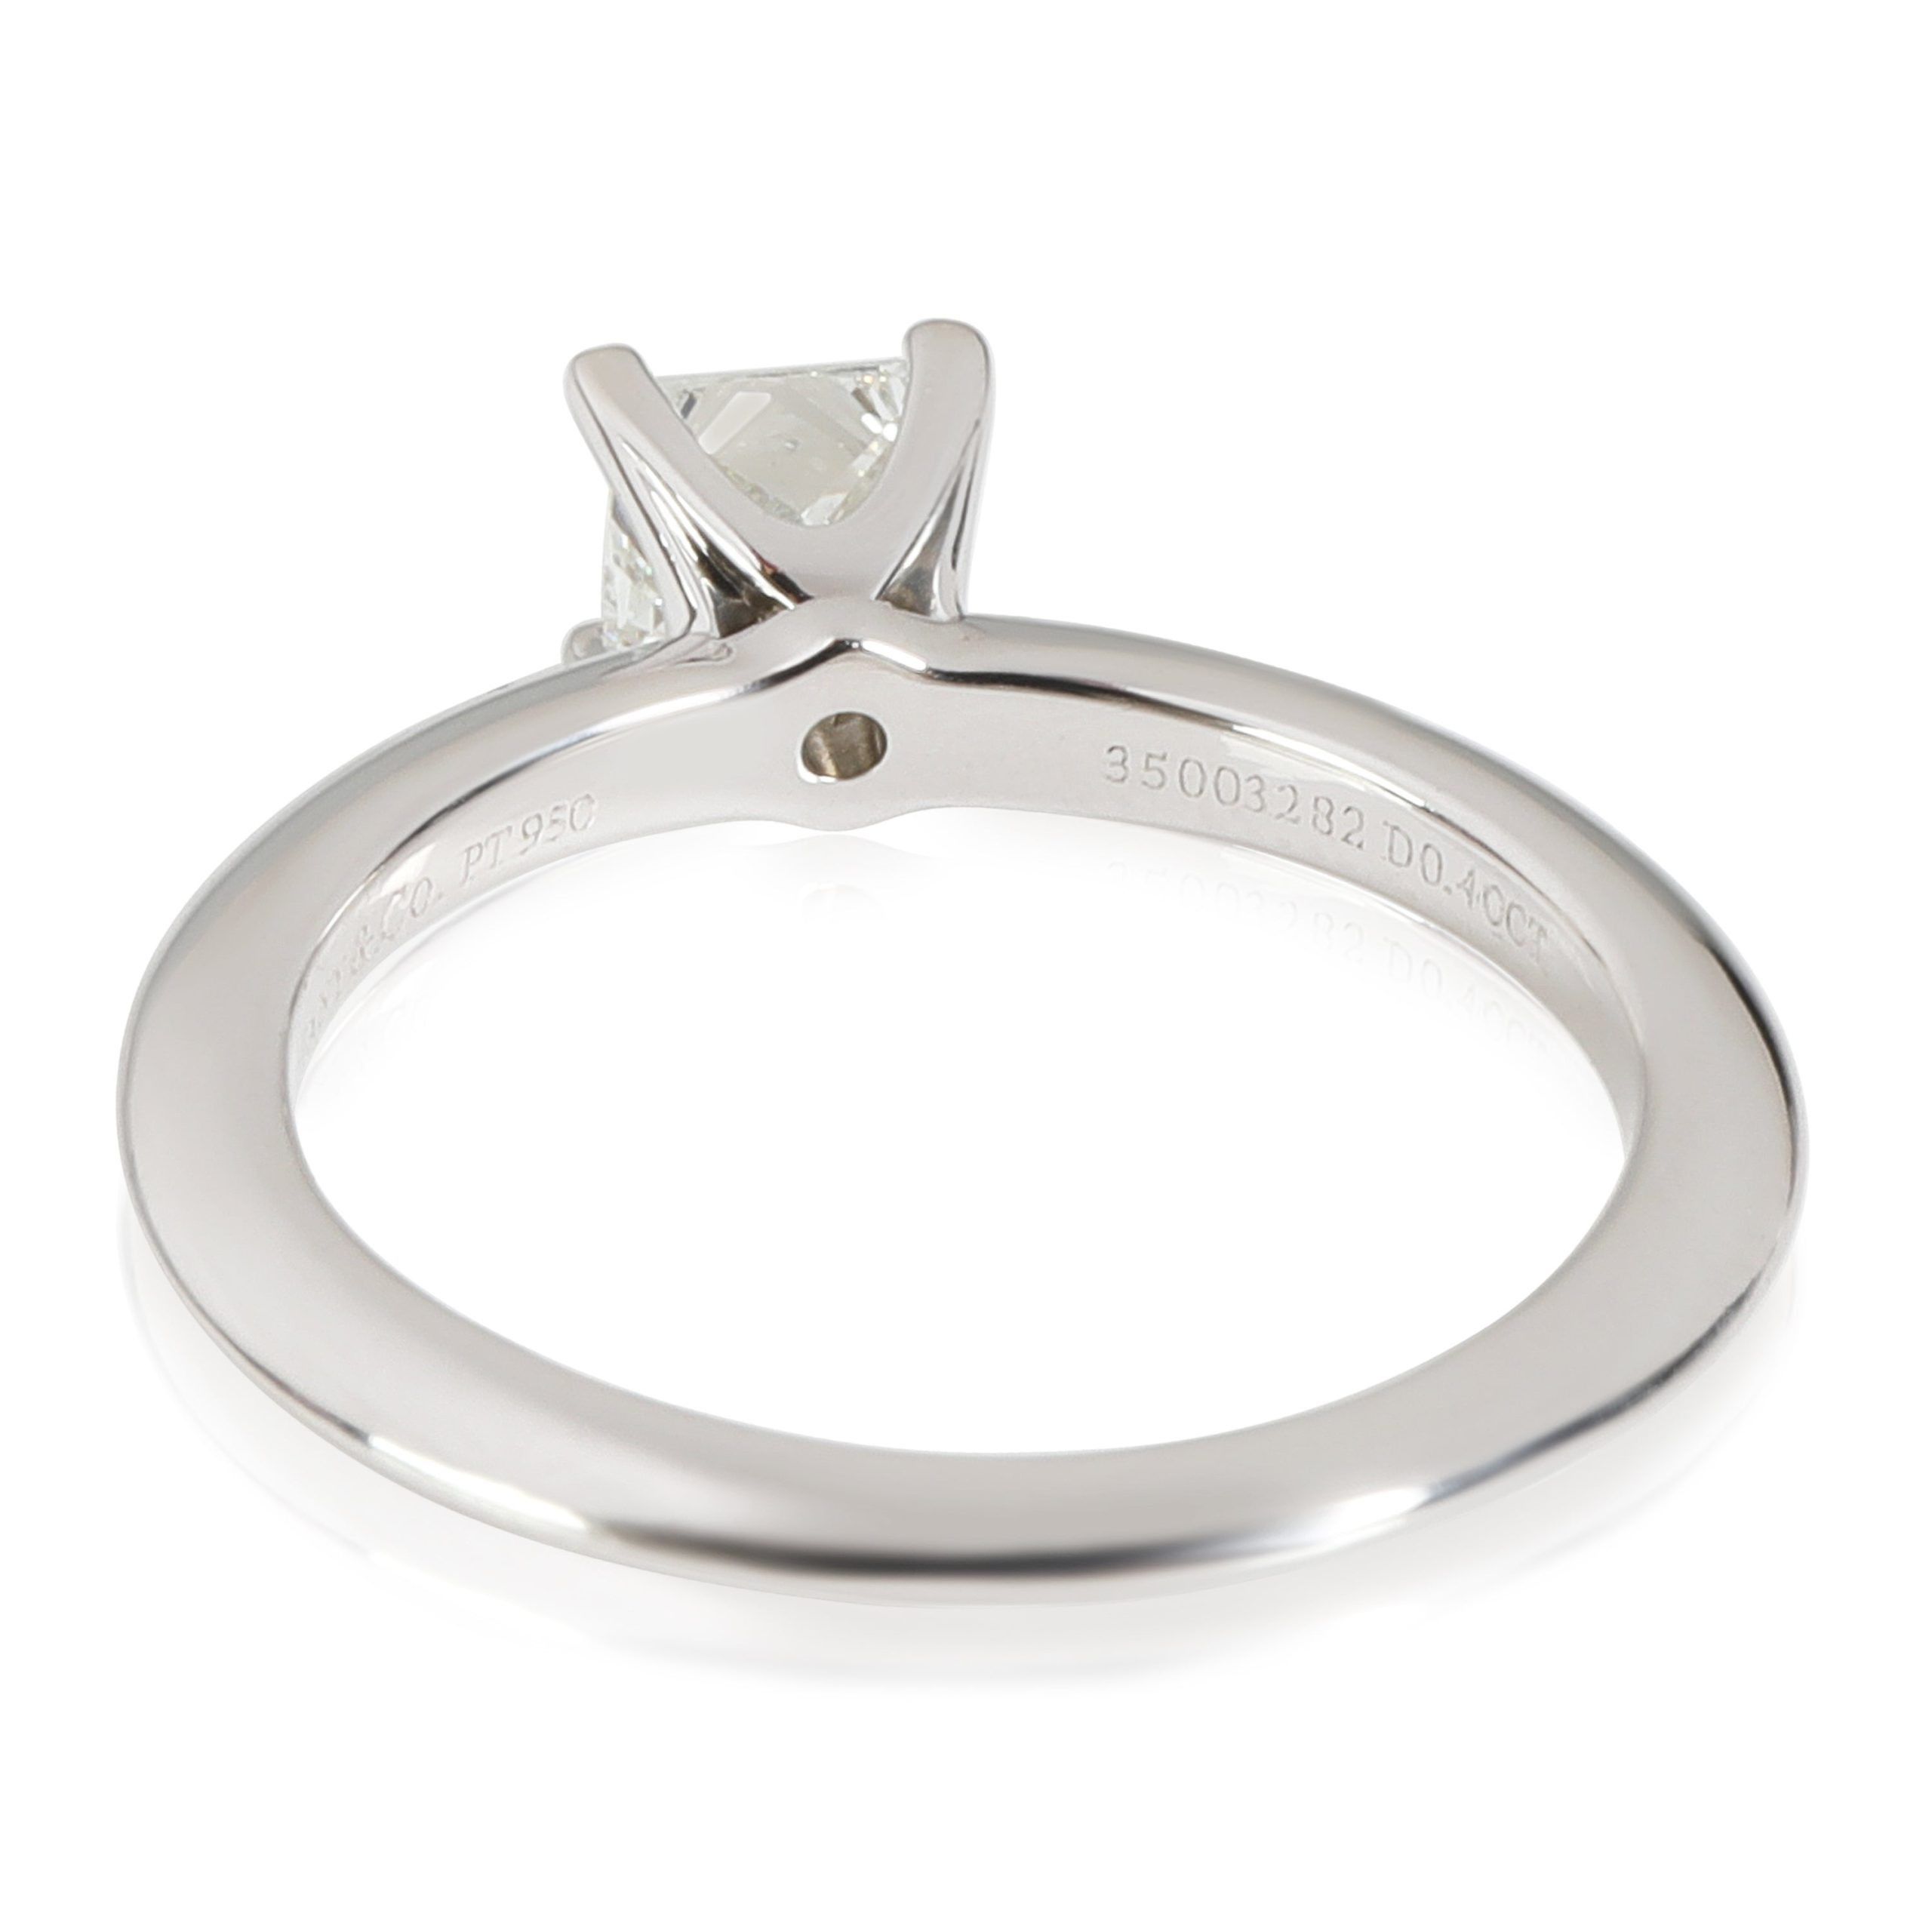 Tiffany & Co. Tiffany & Co. Diamond Engagement Ring in Platinum I VS2 0.40 CTW Size ONE SIZE - 5 Preview